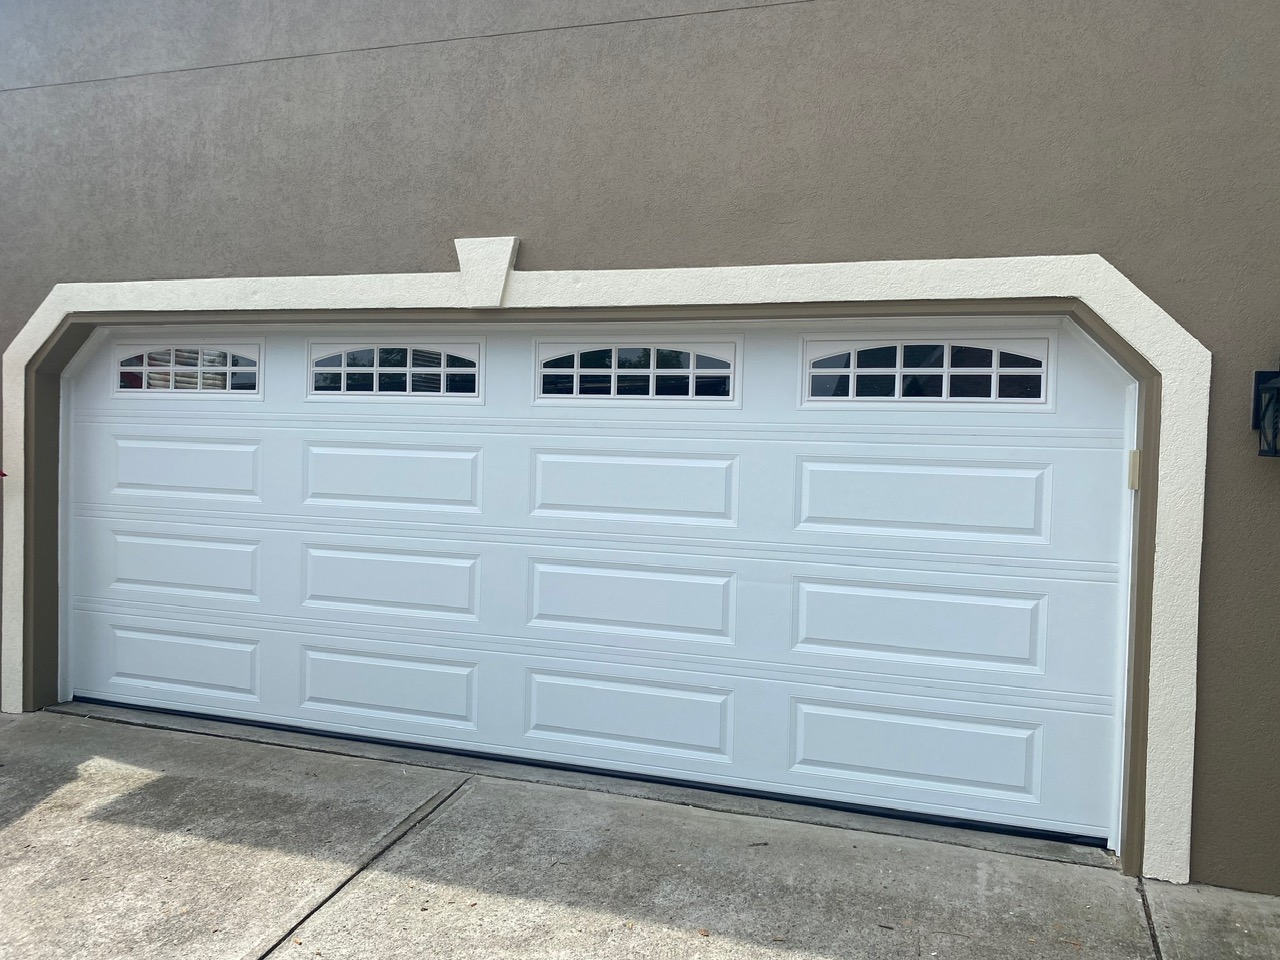 White raised-panel traditional garage door with small windows across the top